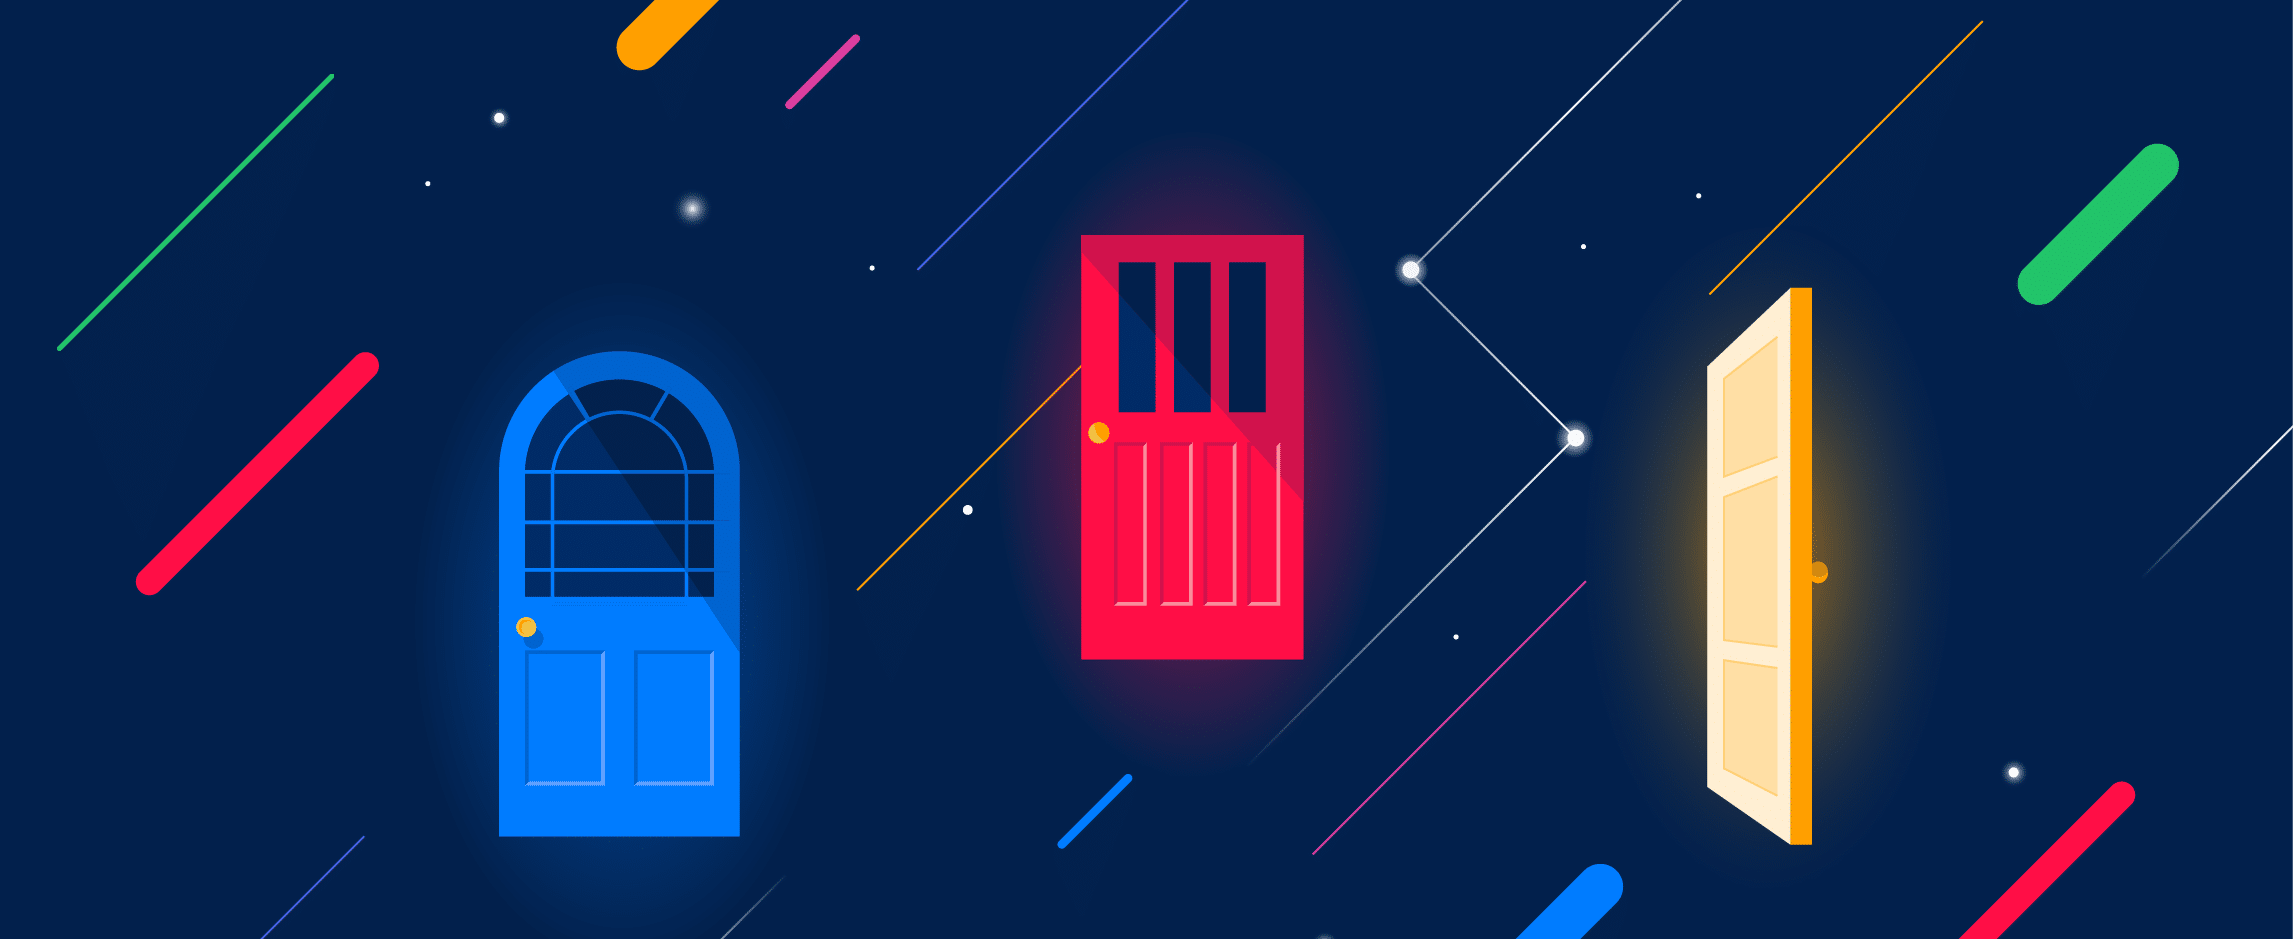 Illustration of doors floating in space to depict AI and Automation in the Mortgage Industry